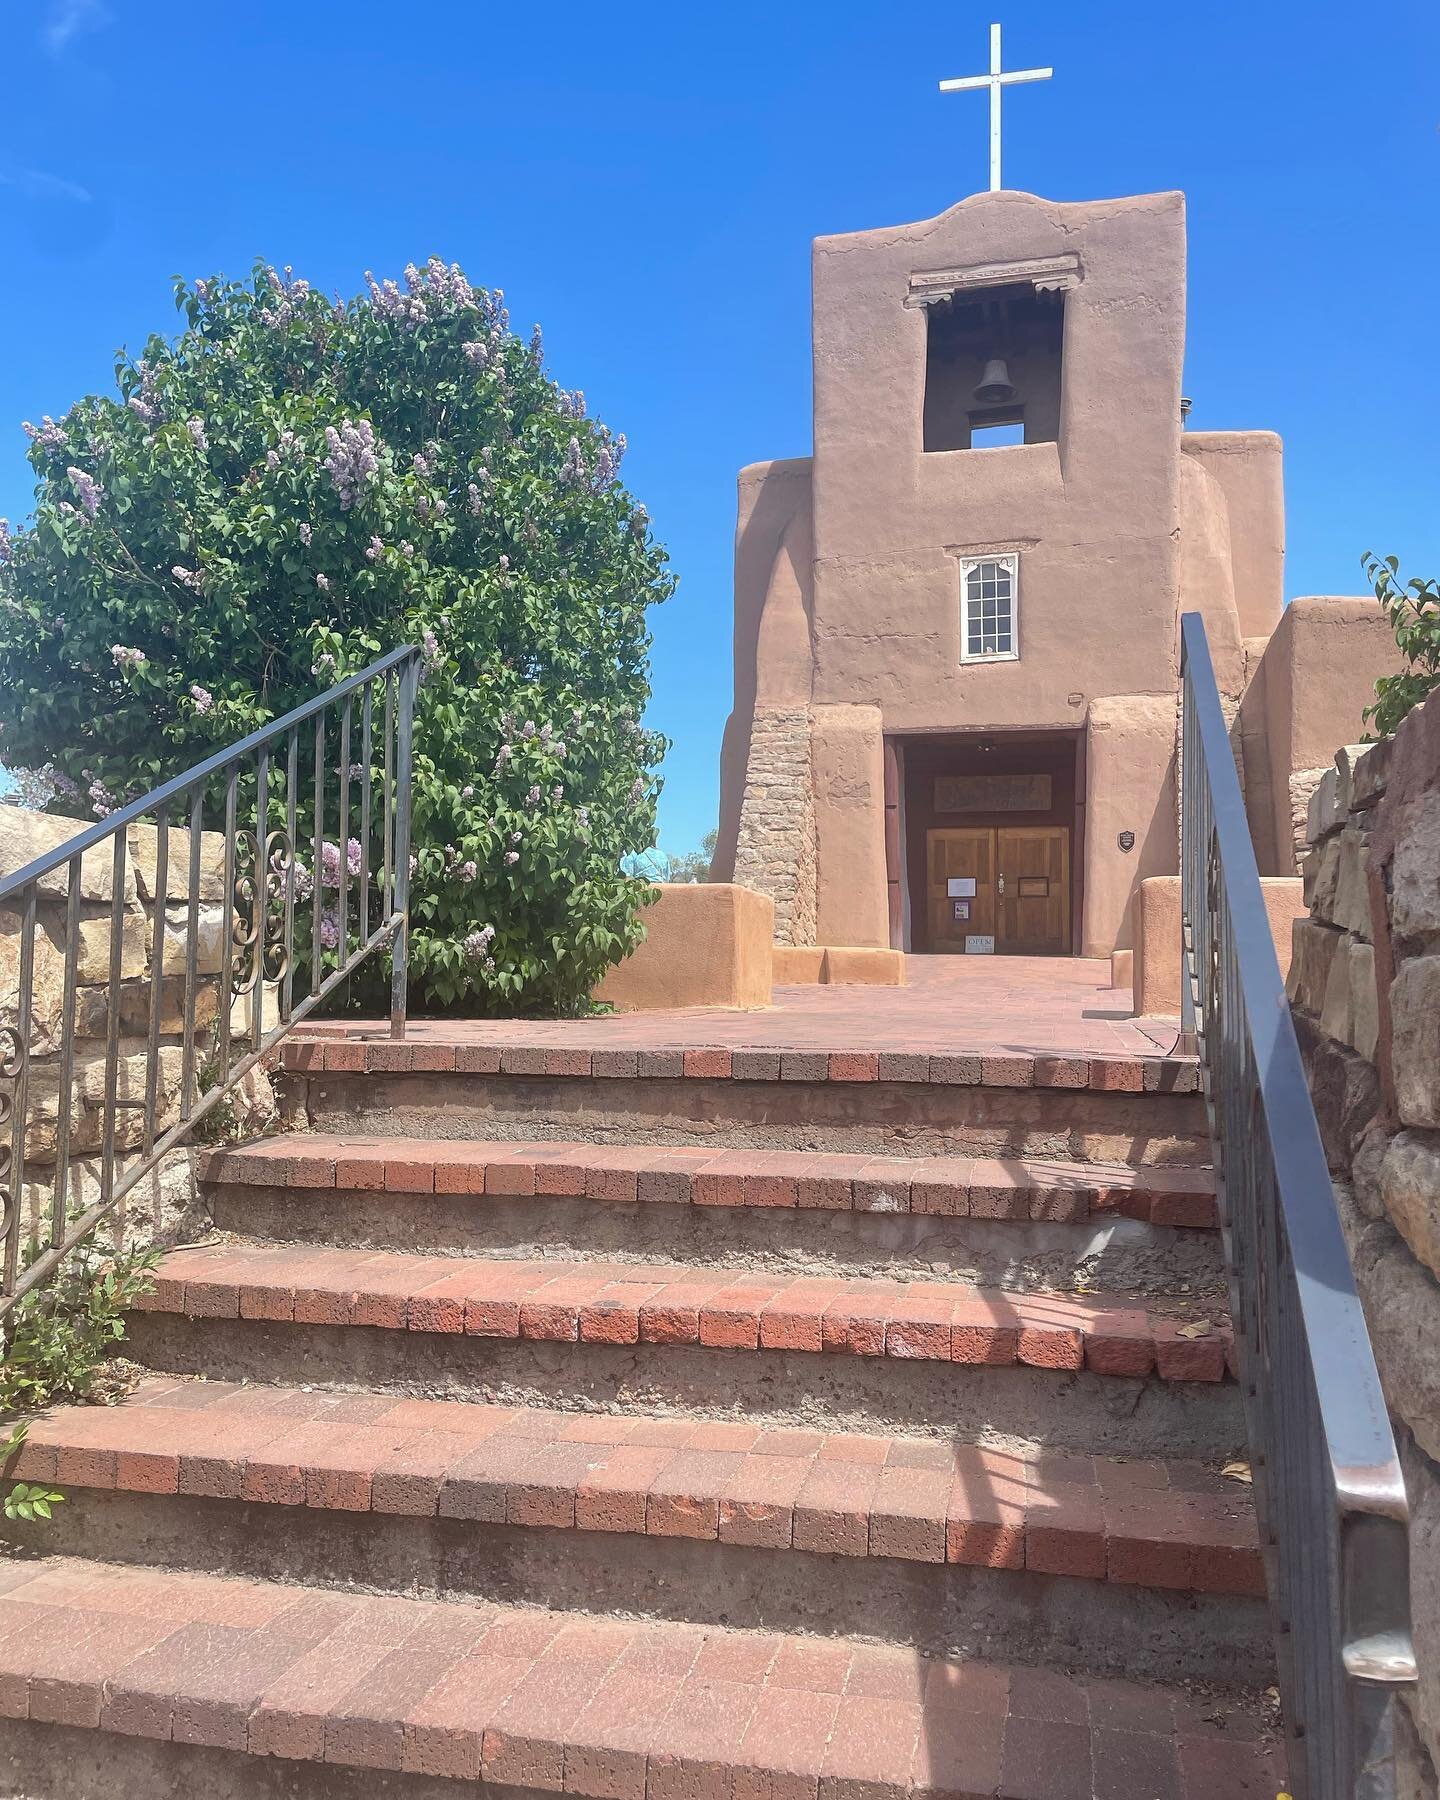 Santa Fe&rsquo;s name means &ldquo;Holy Faith.&rdquo; 

Feeling peaceful, affirmed and renewed after spending some time here this week for the @sdiworld conference. 

So grateful! 🙏

#santafe #spiritualdirection